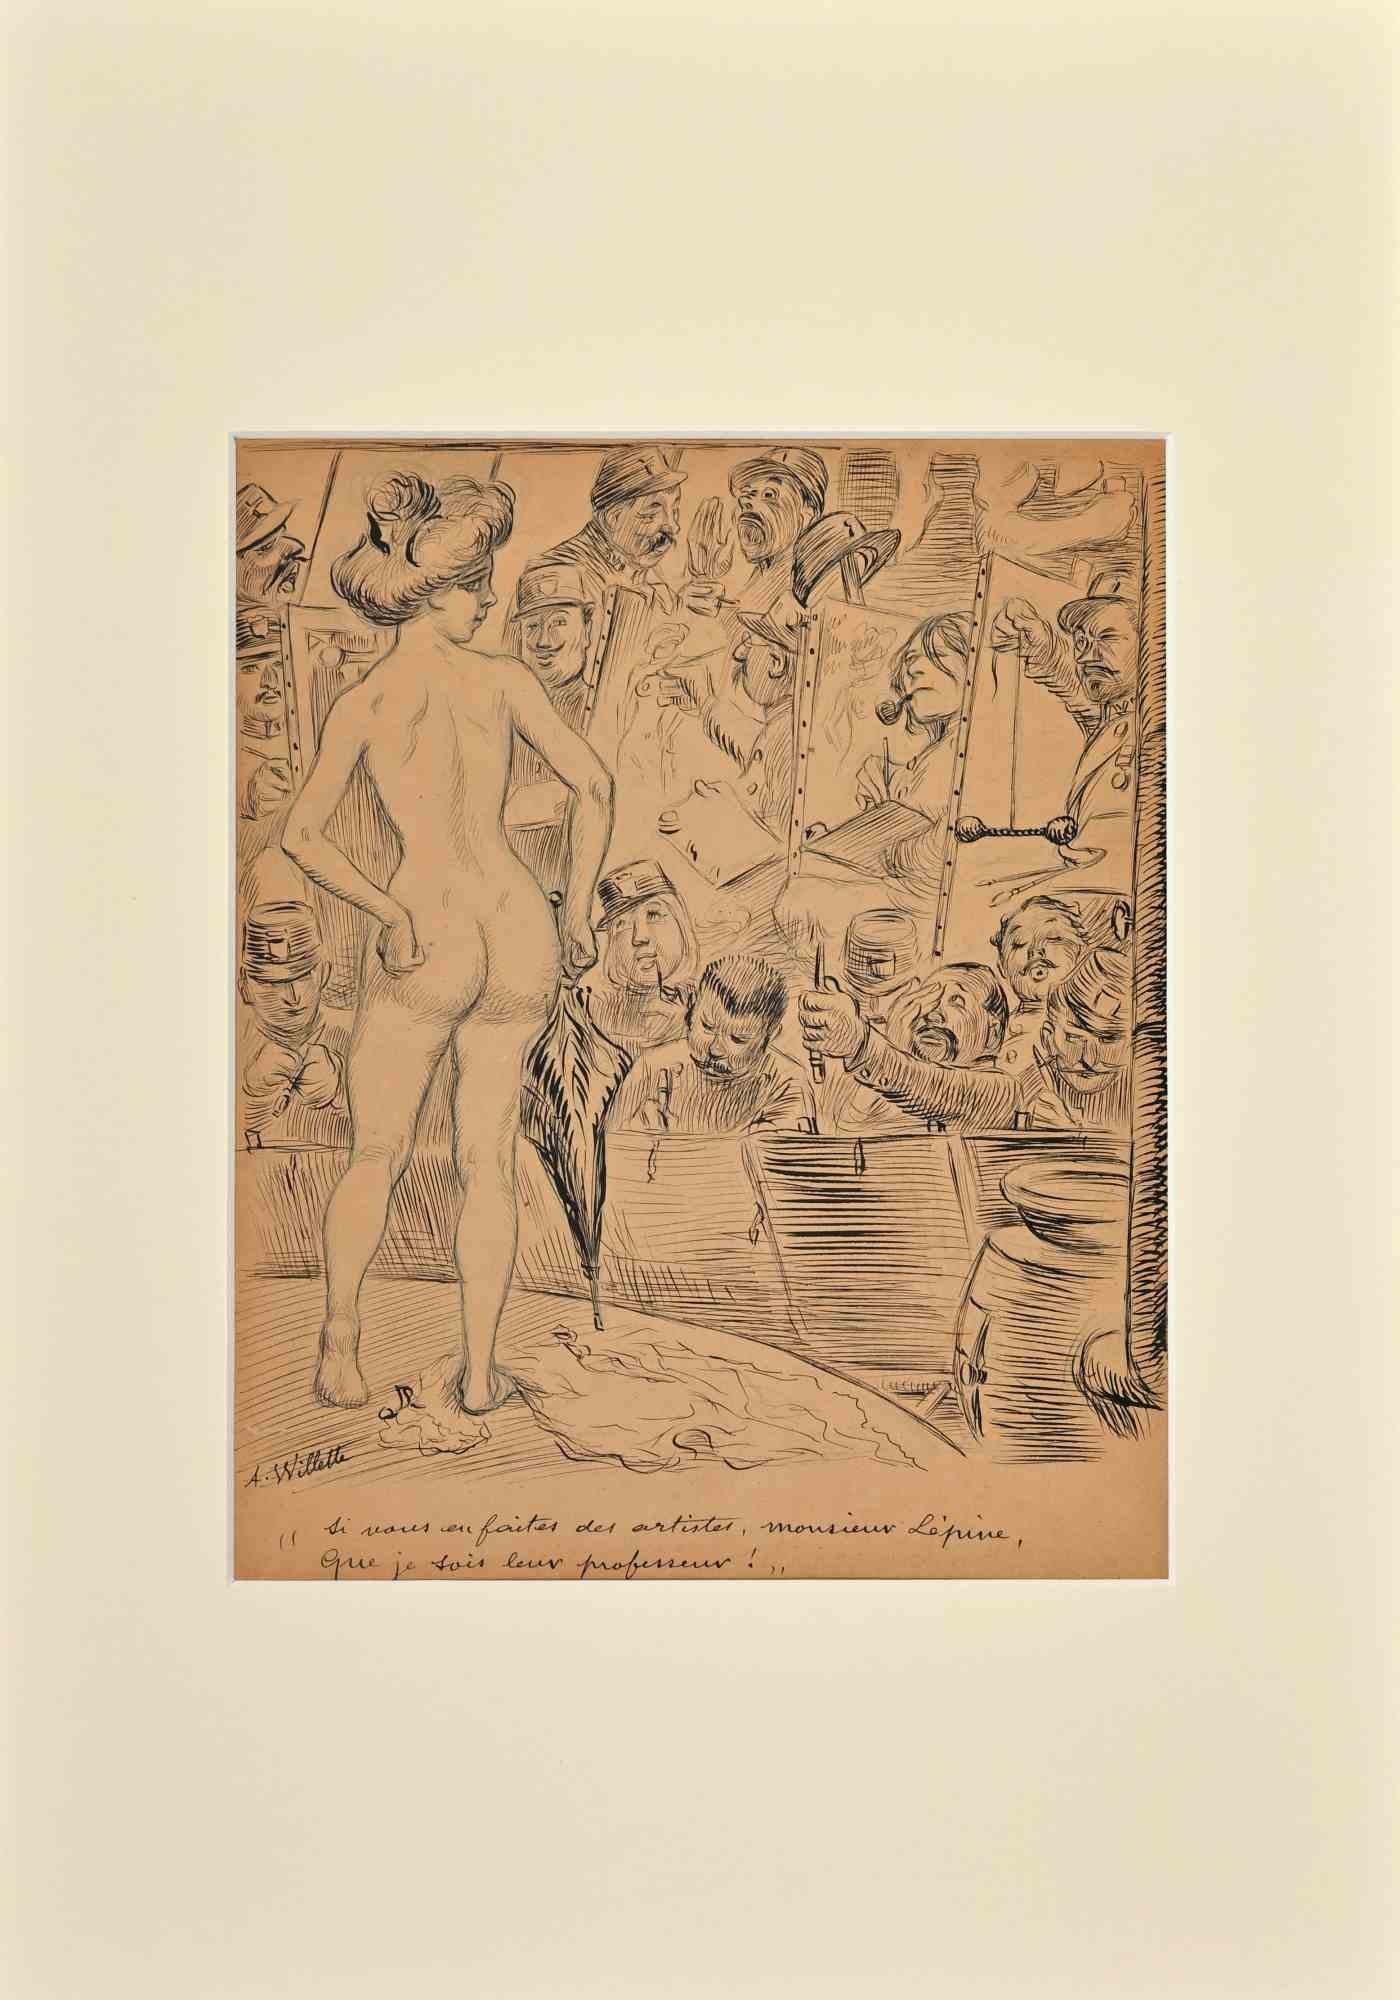 Ecole de Peinture  - Drawing by Adolphe Willette - Late-19th century 